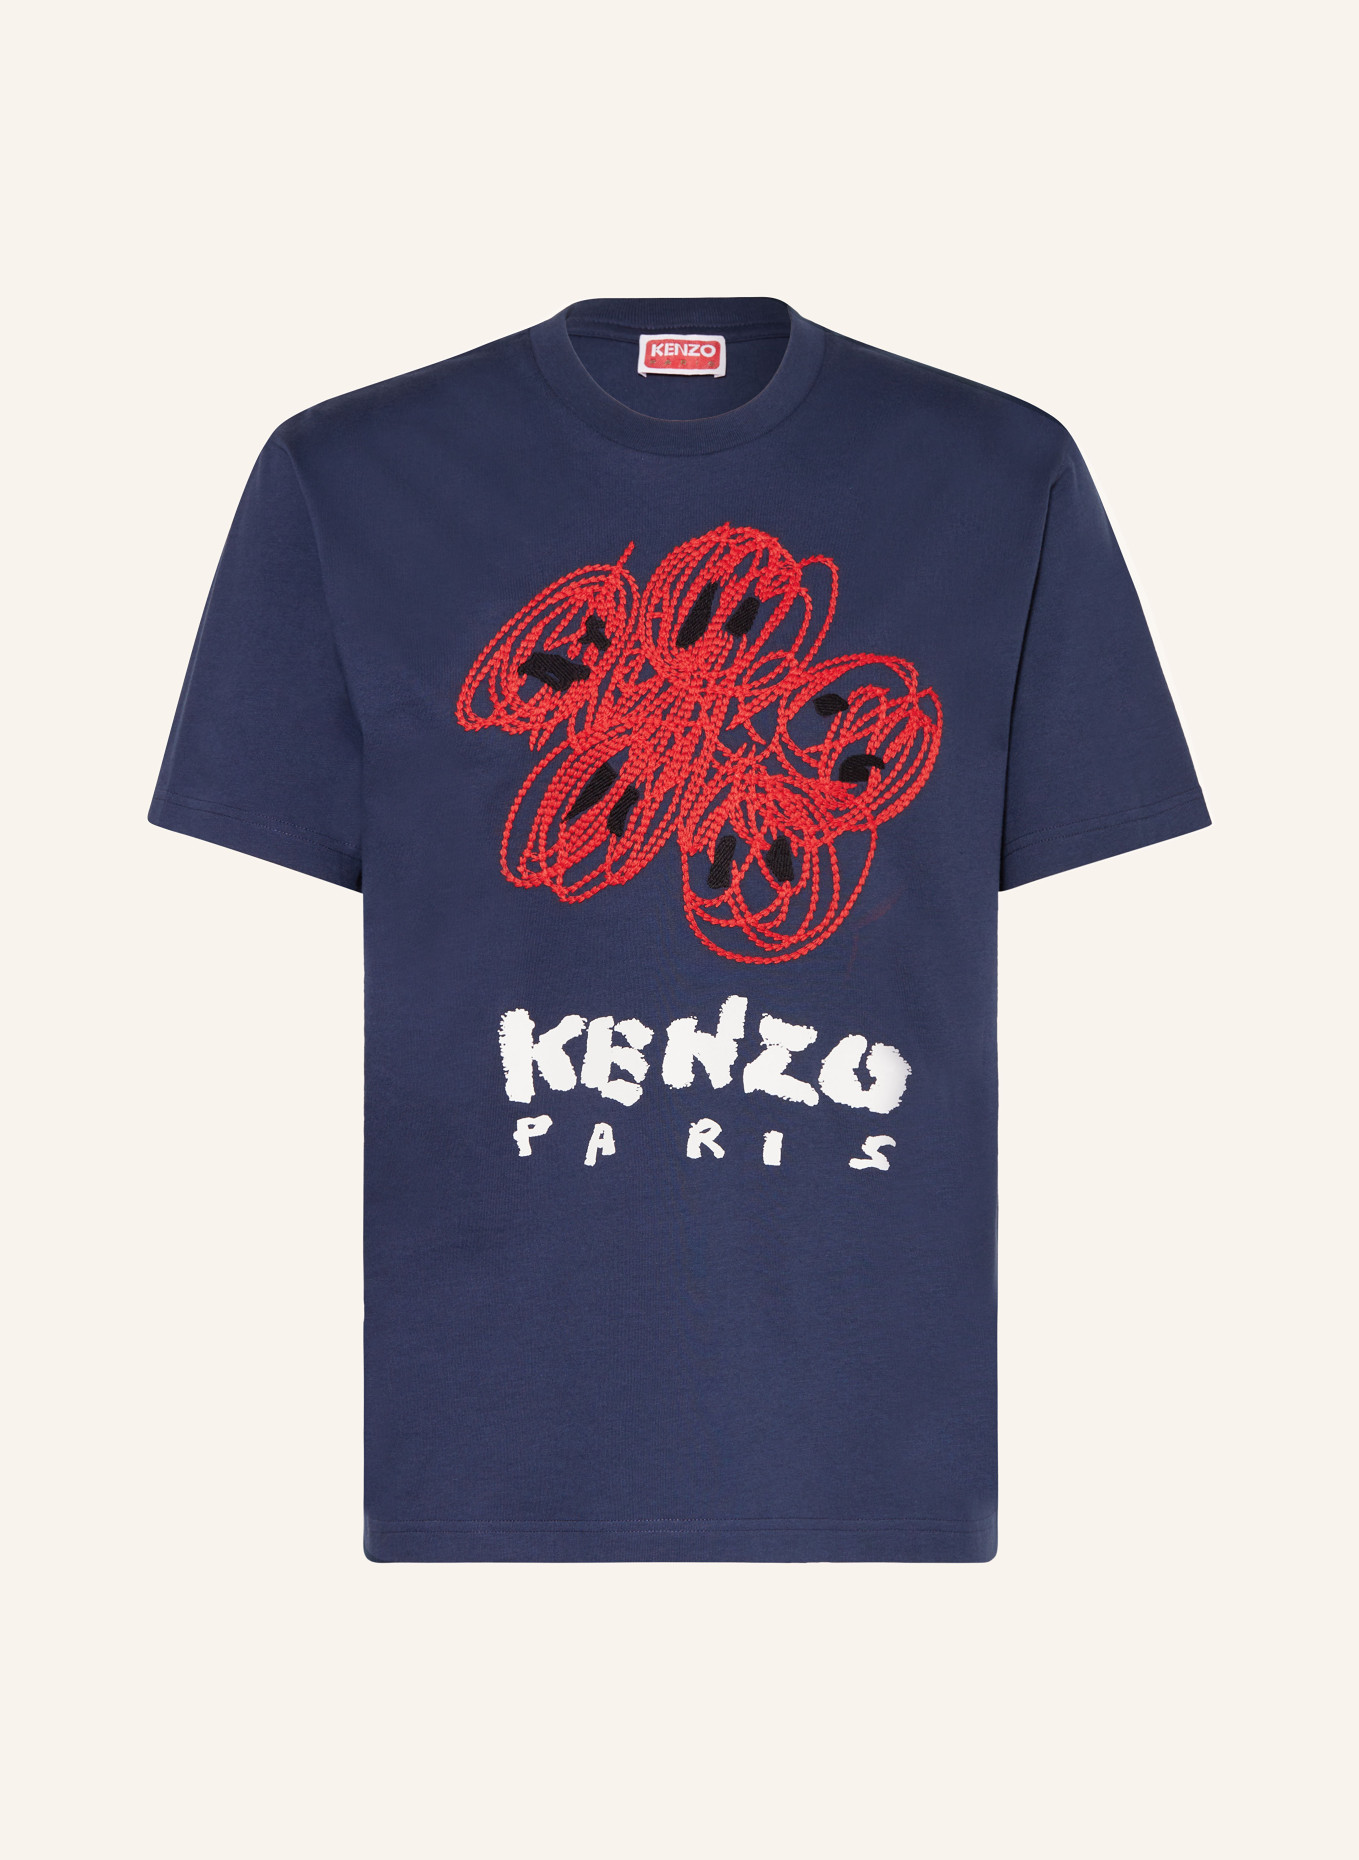 KENZO T-shirt, Color: DARK BLUE/ RED/ WHITE (Image 1)